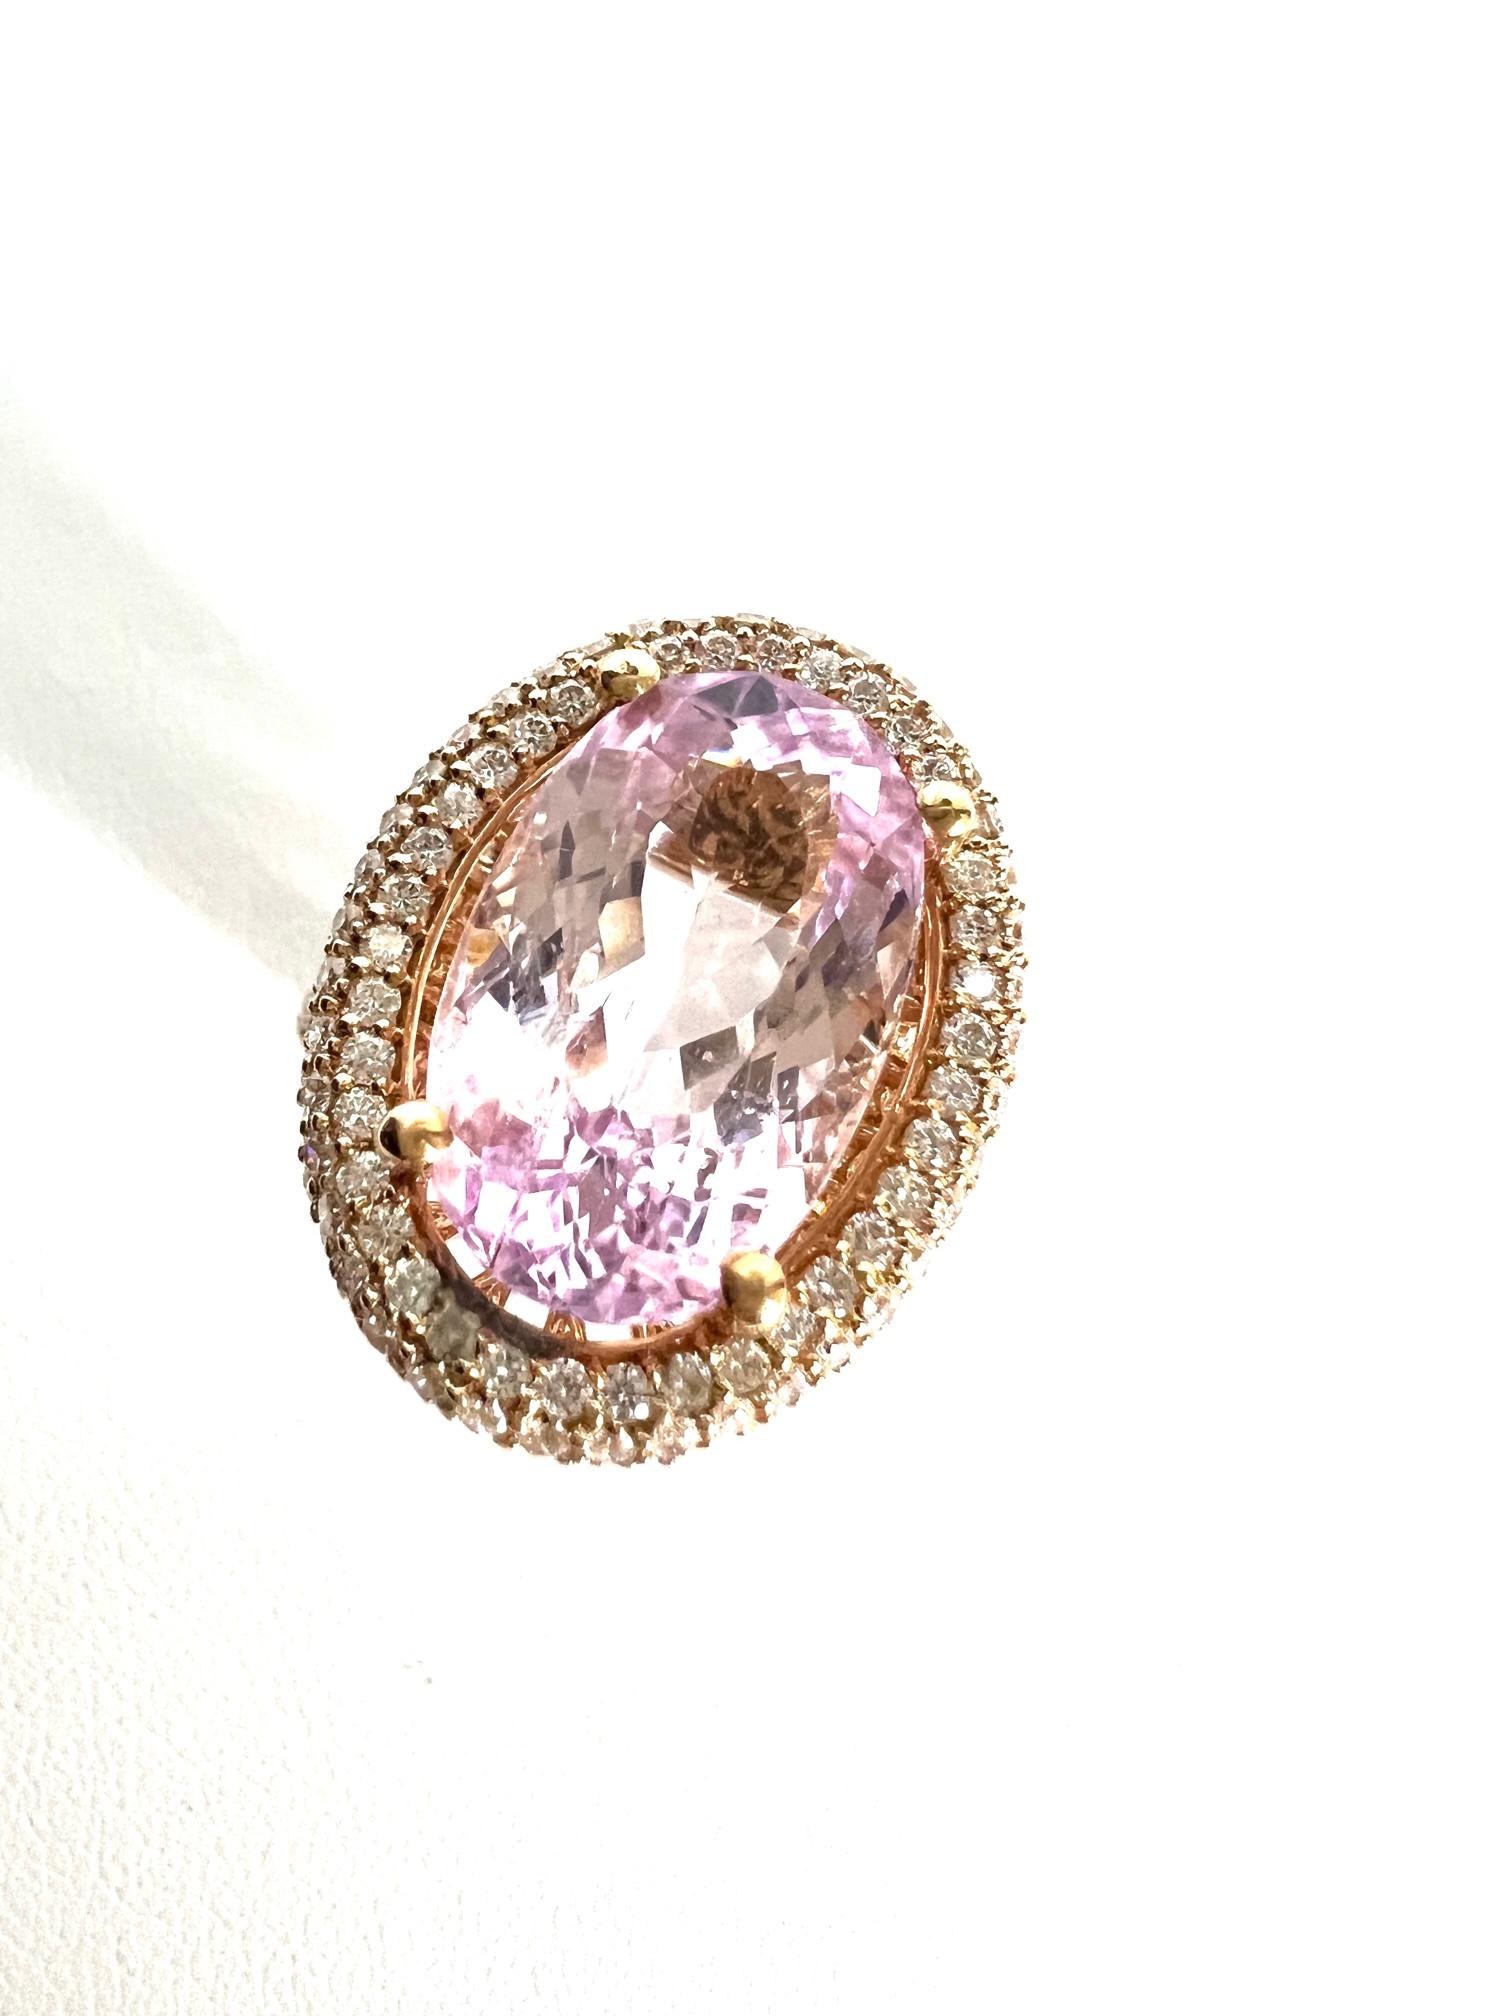 Thomas Leyser is renowned for his contemporary jewellery designs utilizing fine gemstones.

1 ring in 18k Red Gold with 1 Kunzite fac. oval 15,7x10mm, 9,85cts. and diamonds round 1,2mm G/VS, 4,22cts..

Ringsize is 56 (7,6) and resizable.